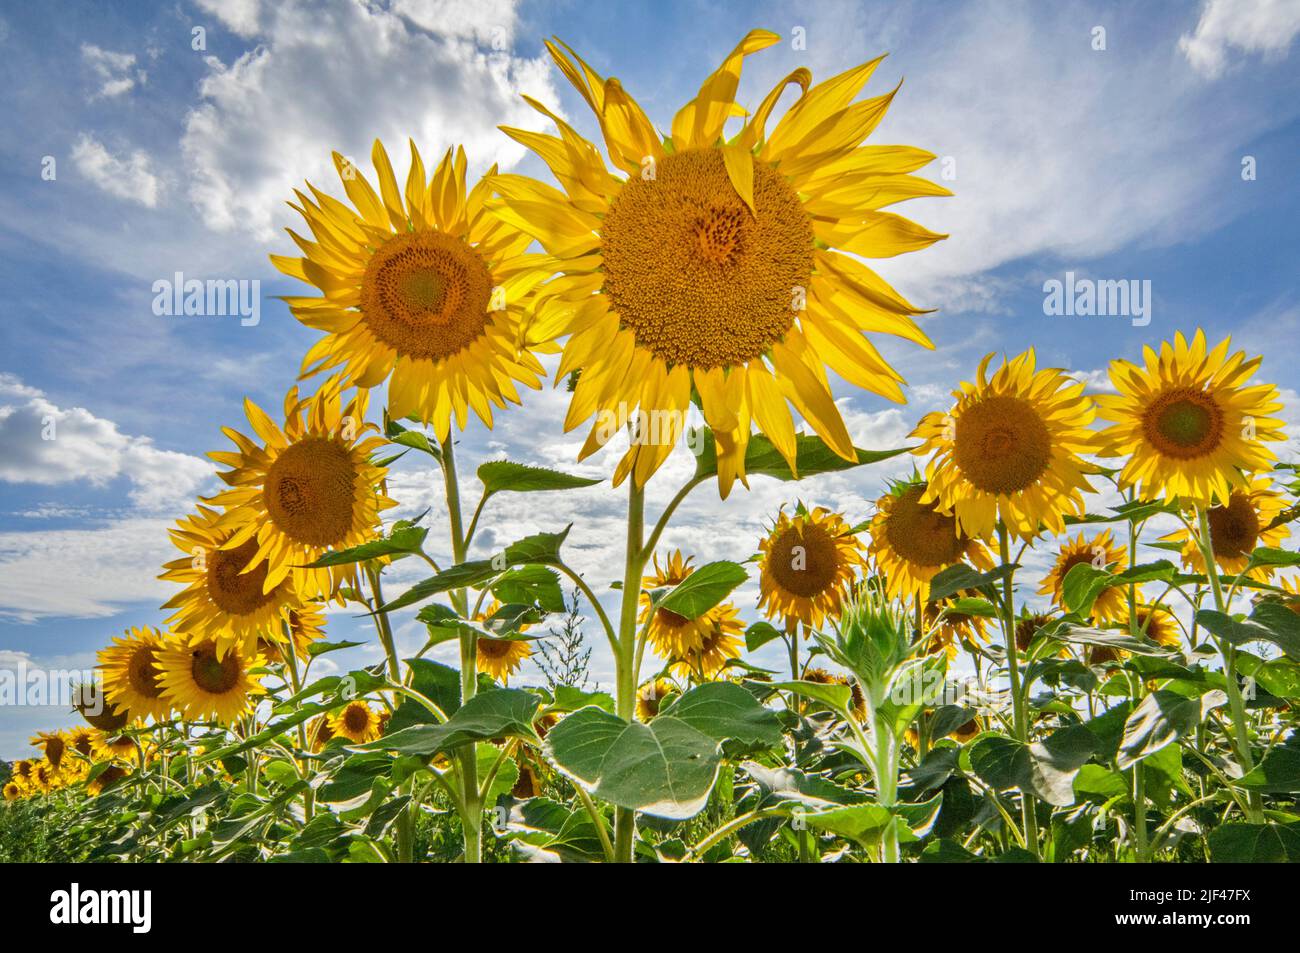 Field with flowering common sunflowers (Helianthus annuus) showing yellow flowerheads / flower heads on a cloudy sky in summer Stock Photo